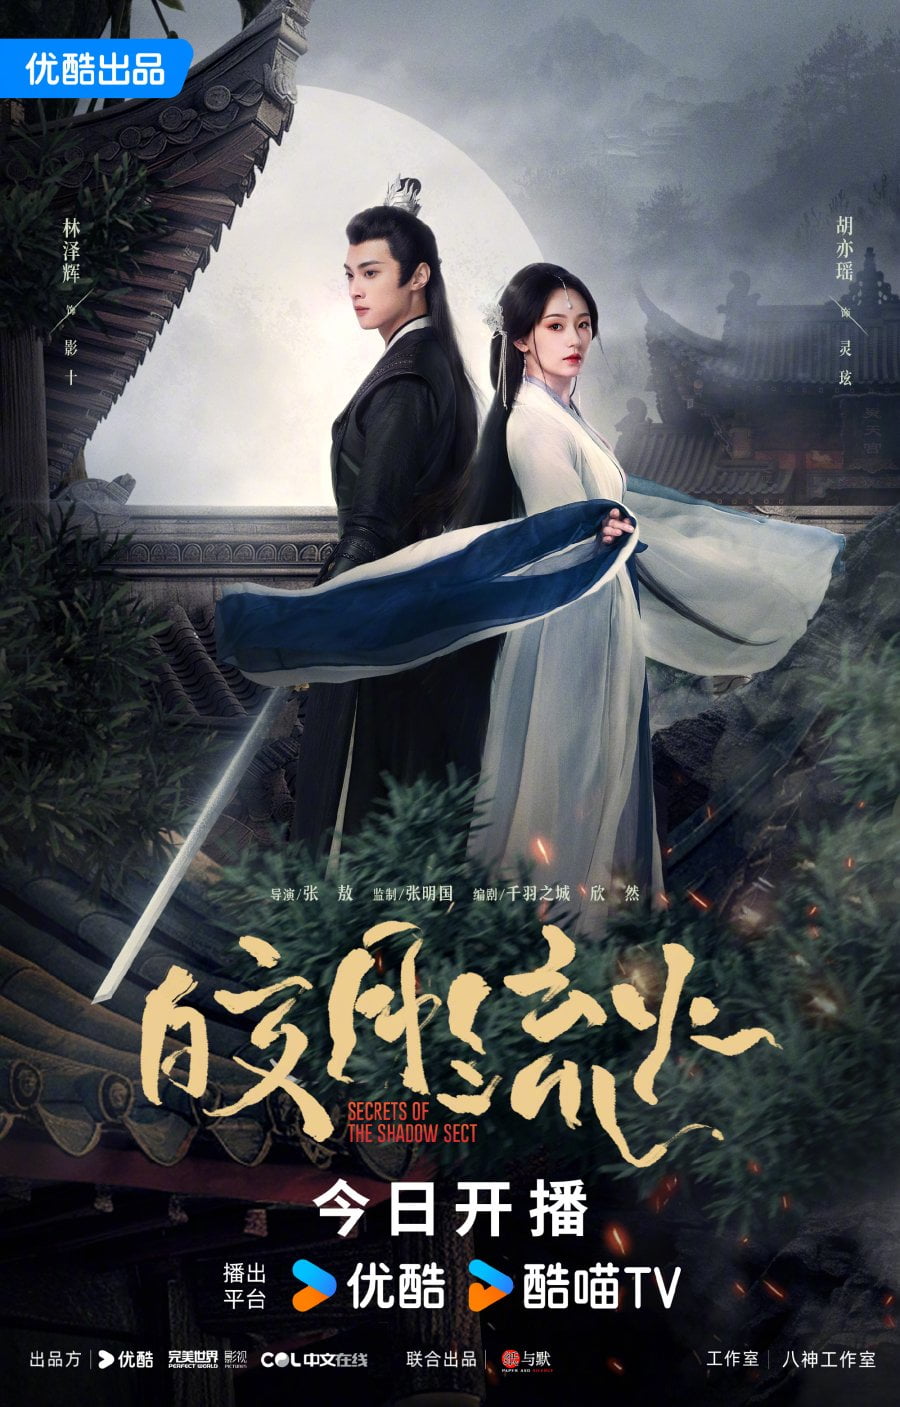 Martial Arts Drama Secrets of the Shadow Sect is Ready to Watch